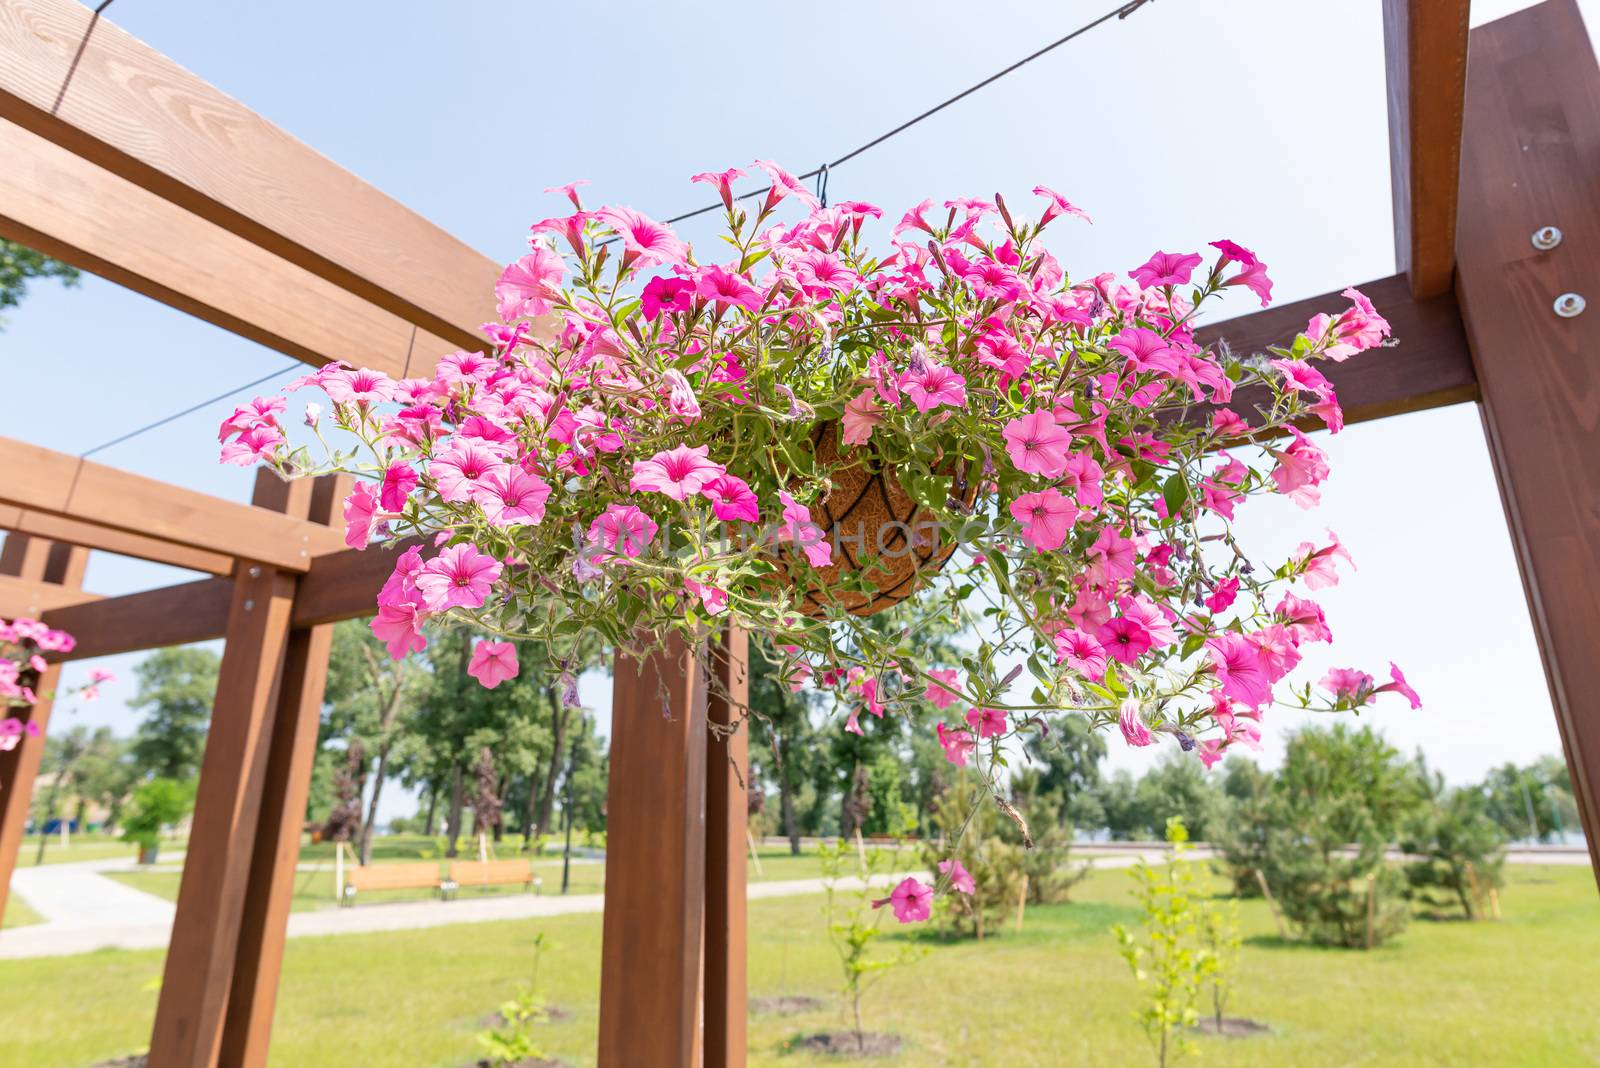 Hanging garden of pink petunia roses in the Natalka park of Kiev, Ukraine, under a warm spring sun. The flowers are placed in baskets suspended from a wooden structure of the "pergola" type